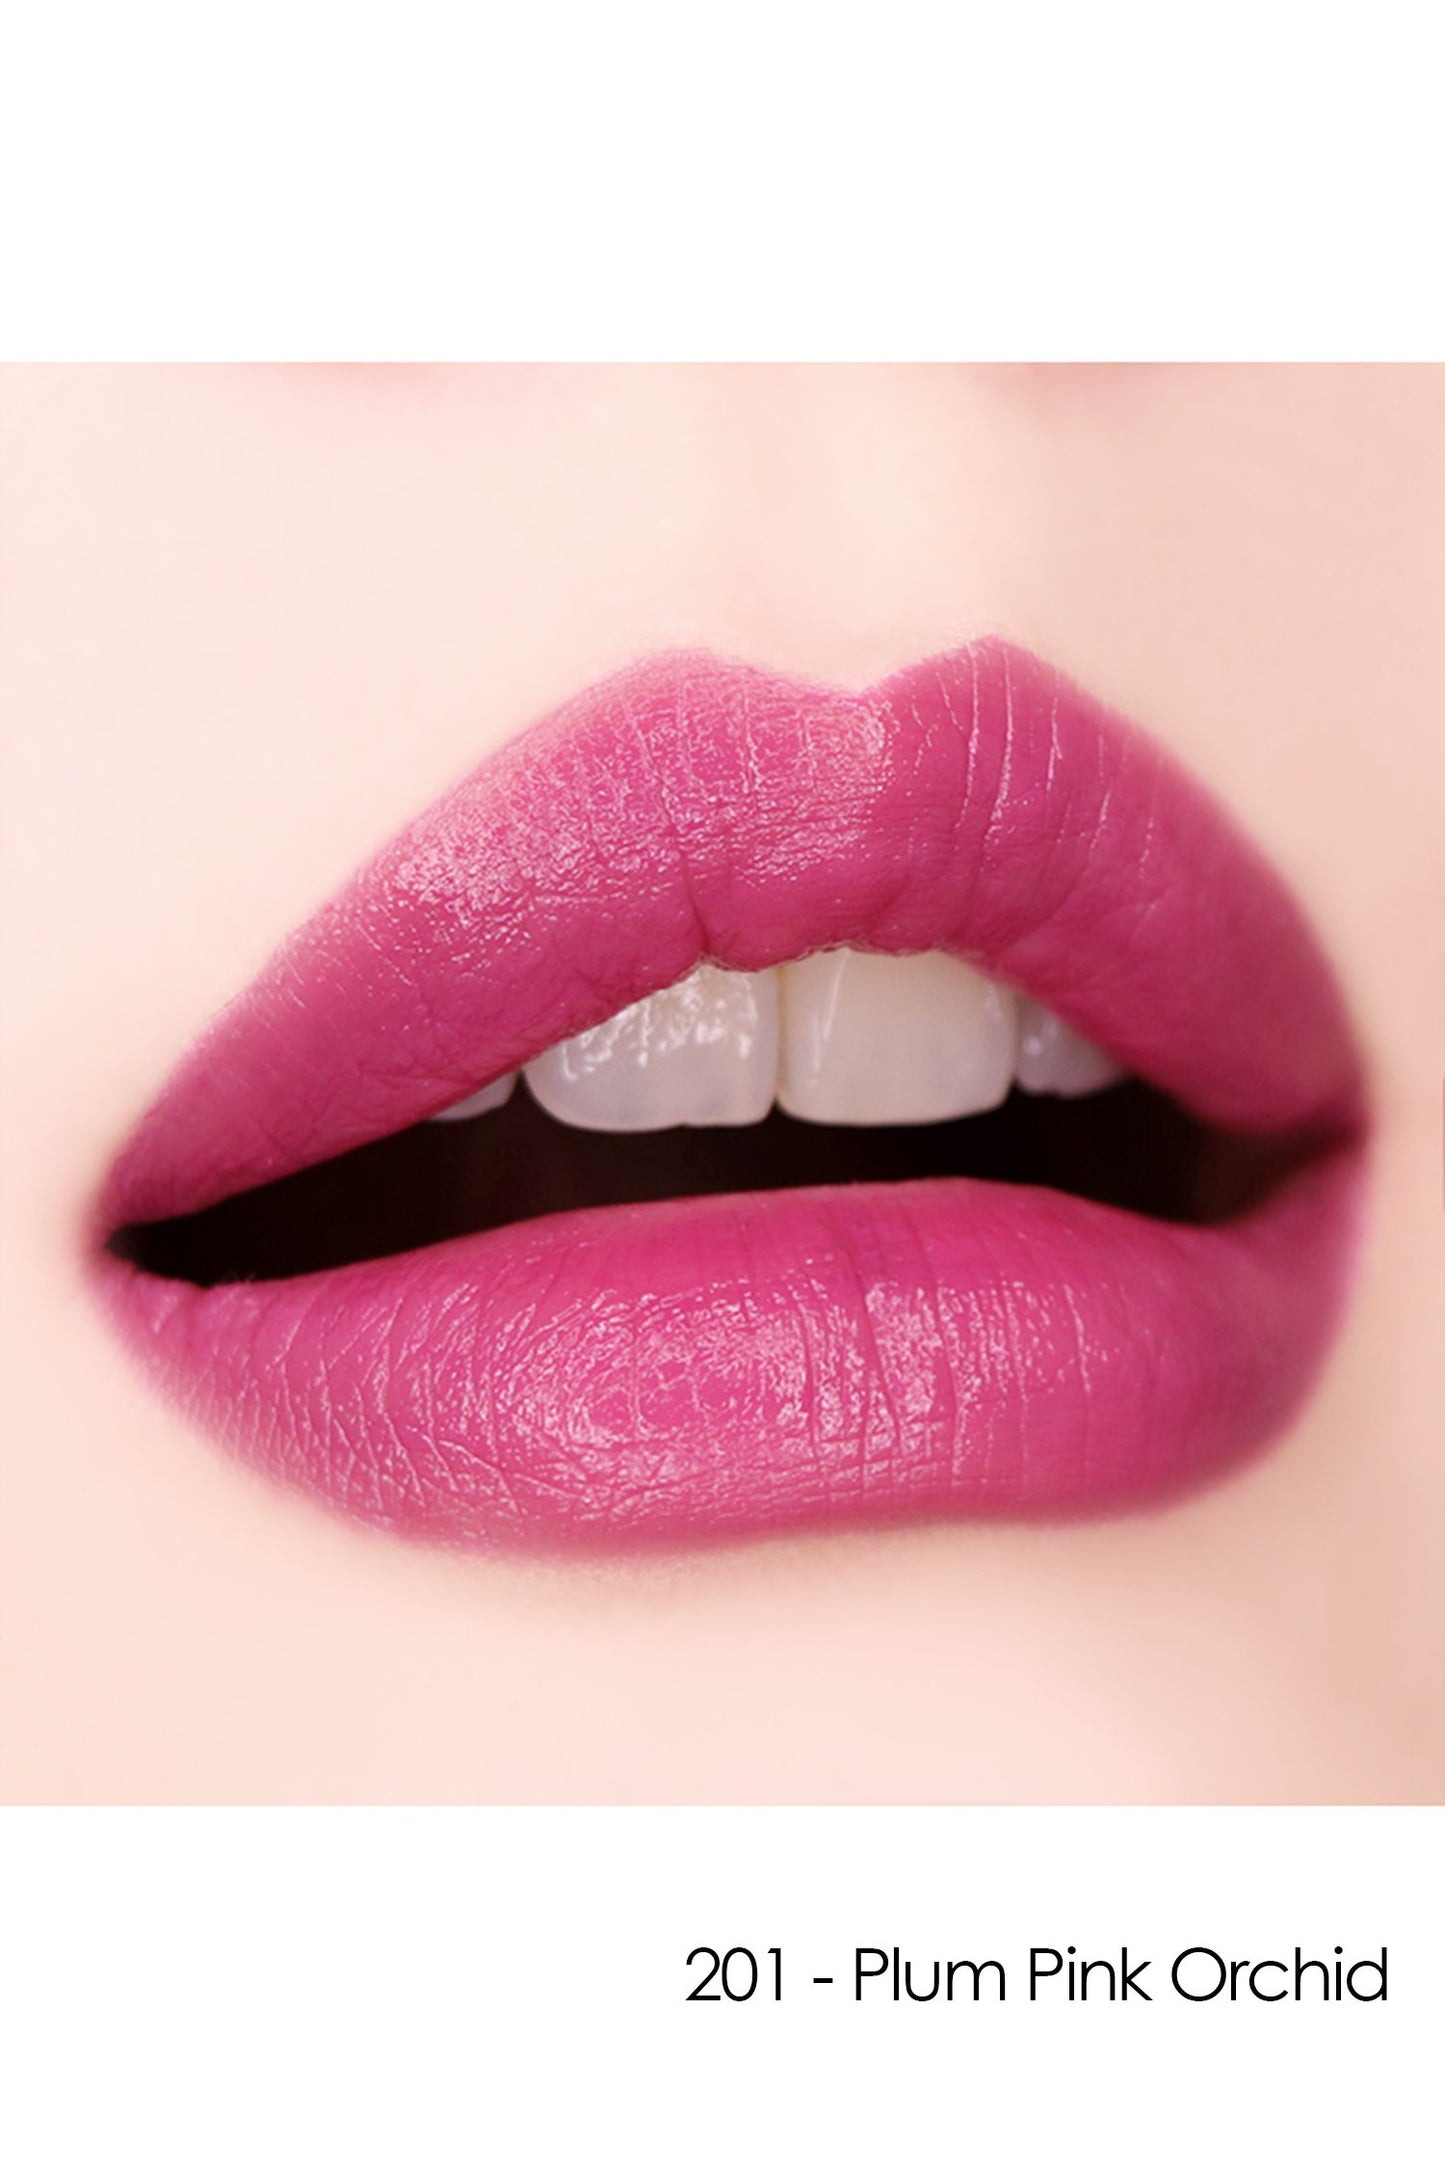 Lips with Lipstick F: Fairy Flower 201 - Plum Pink Orchid